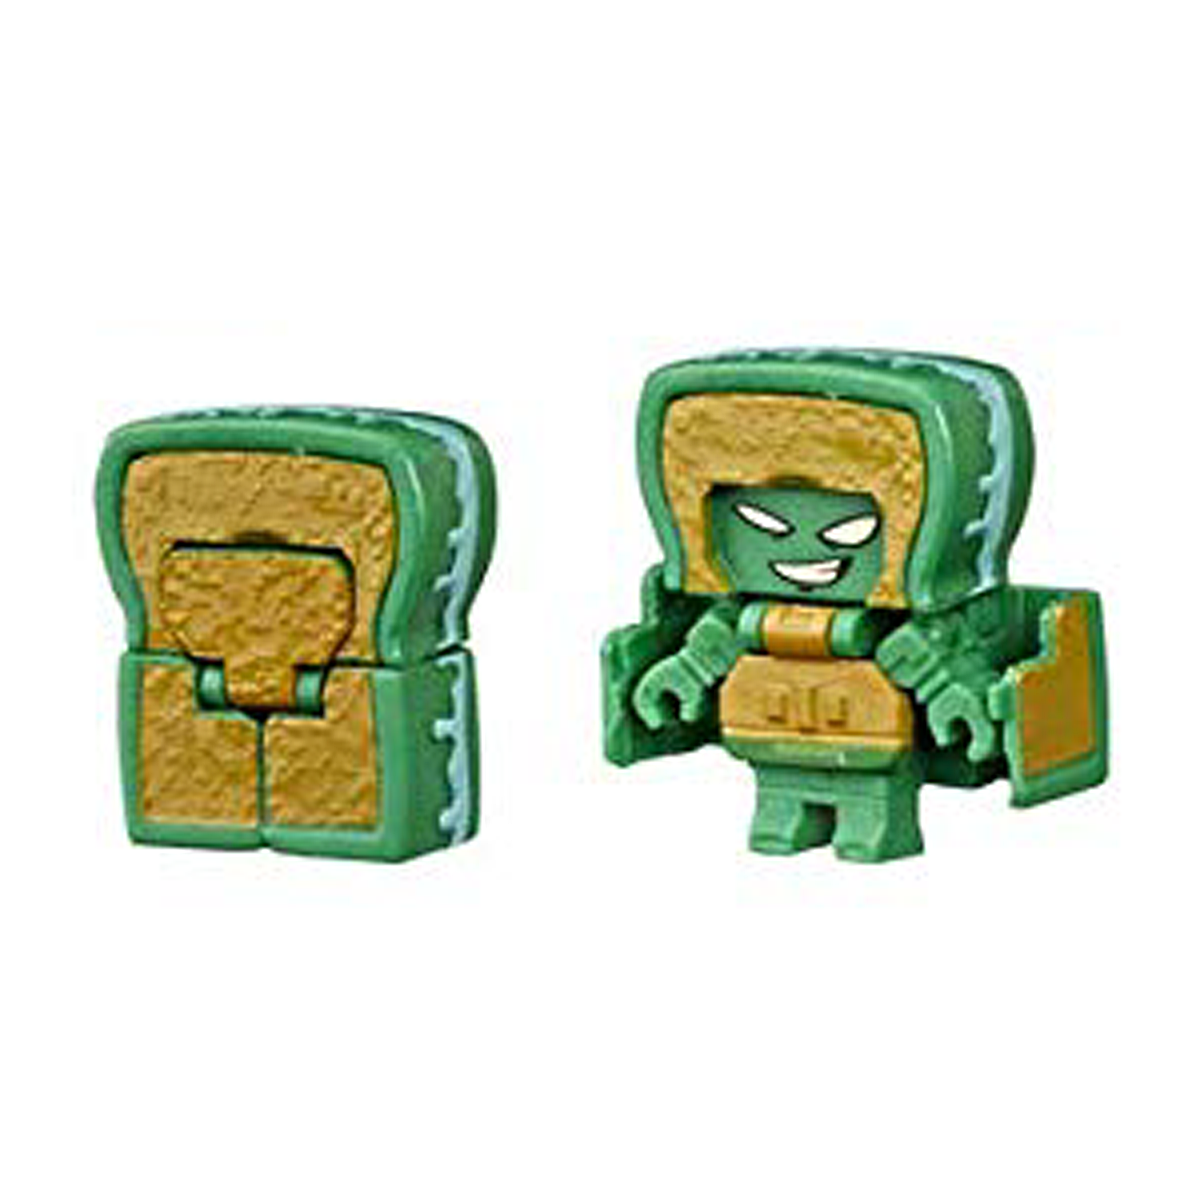 MOLDWICH Transformers BotBots Series 3 Spoiled Rottens expired sandwich 2019